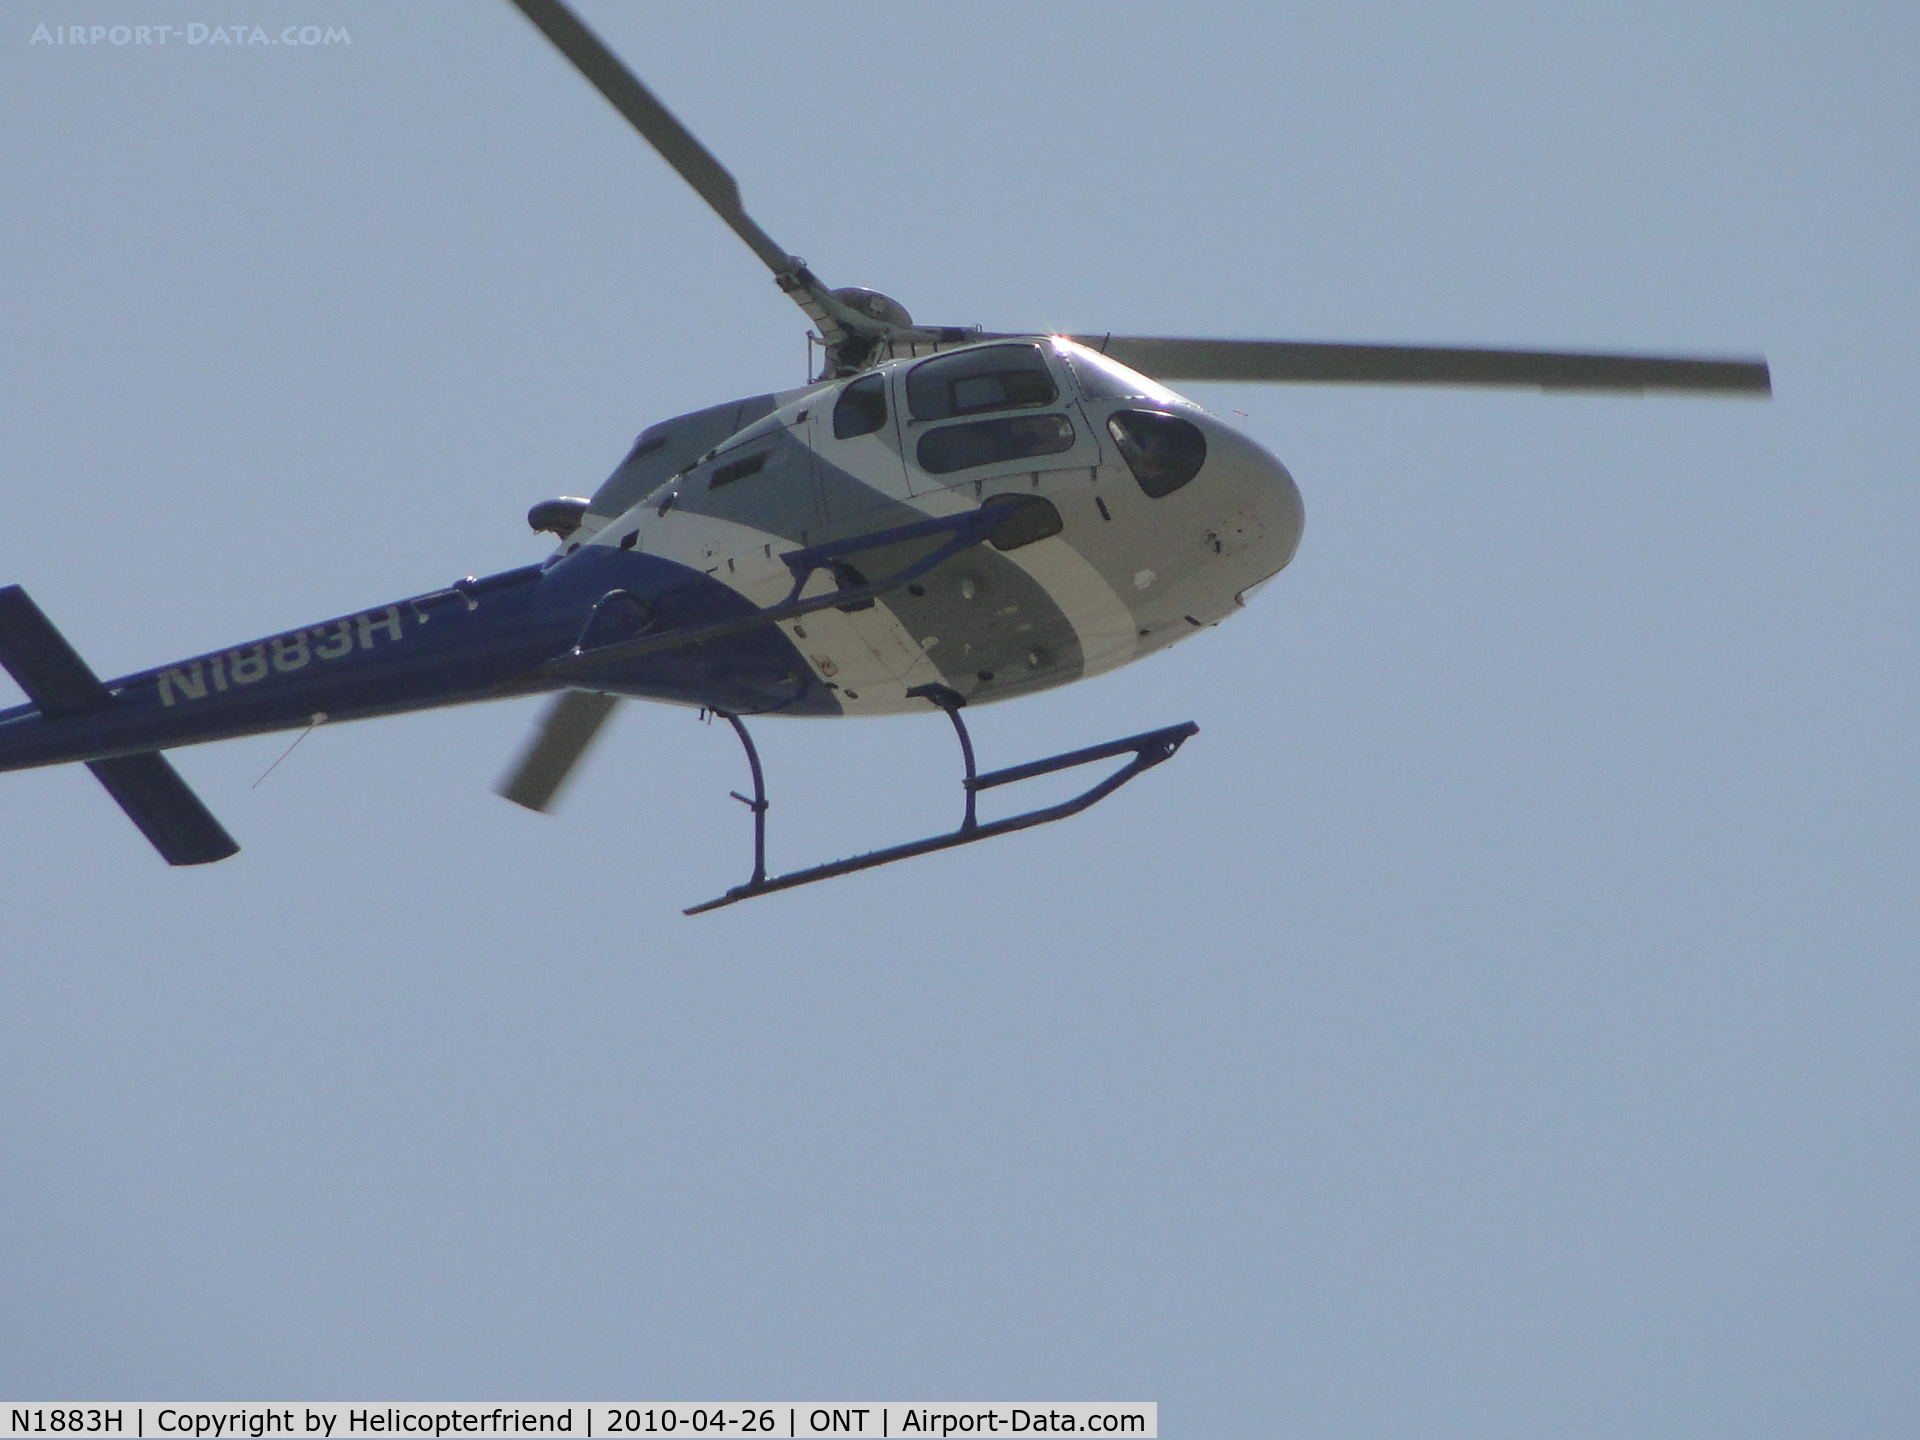 N1883H, 1996 Aerospatiale AS-350B-2 Ecureuil C/N 1883, Snuck up on me with a short final for runway 26L